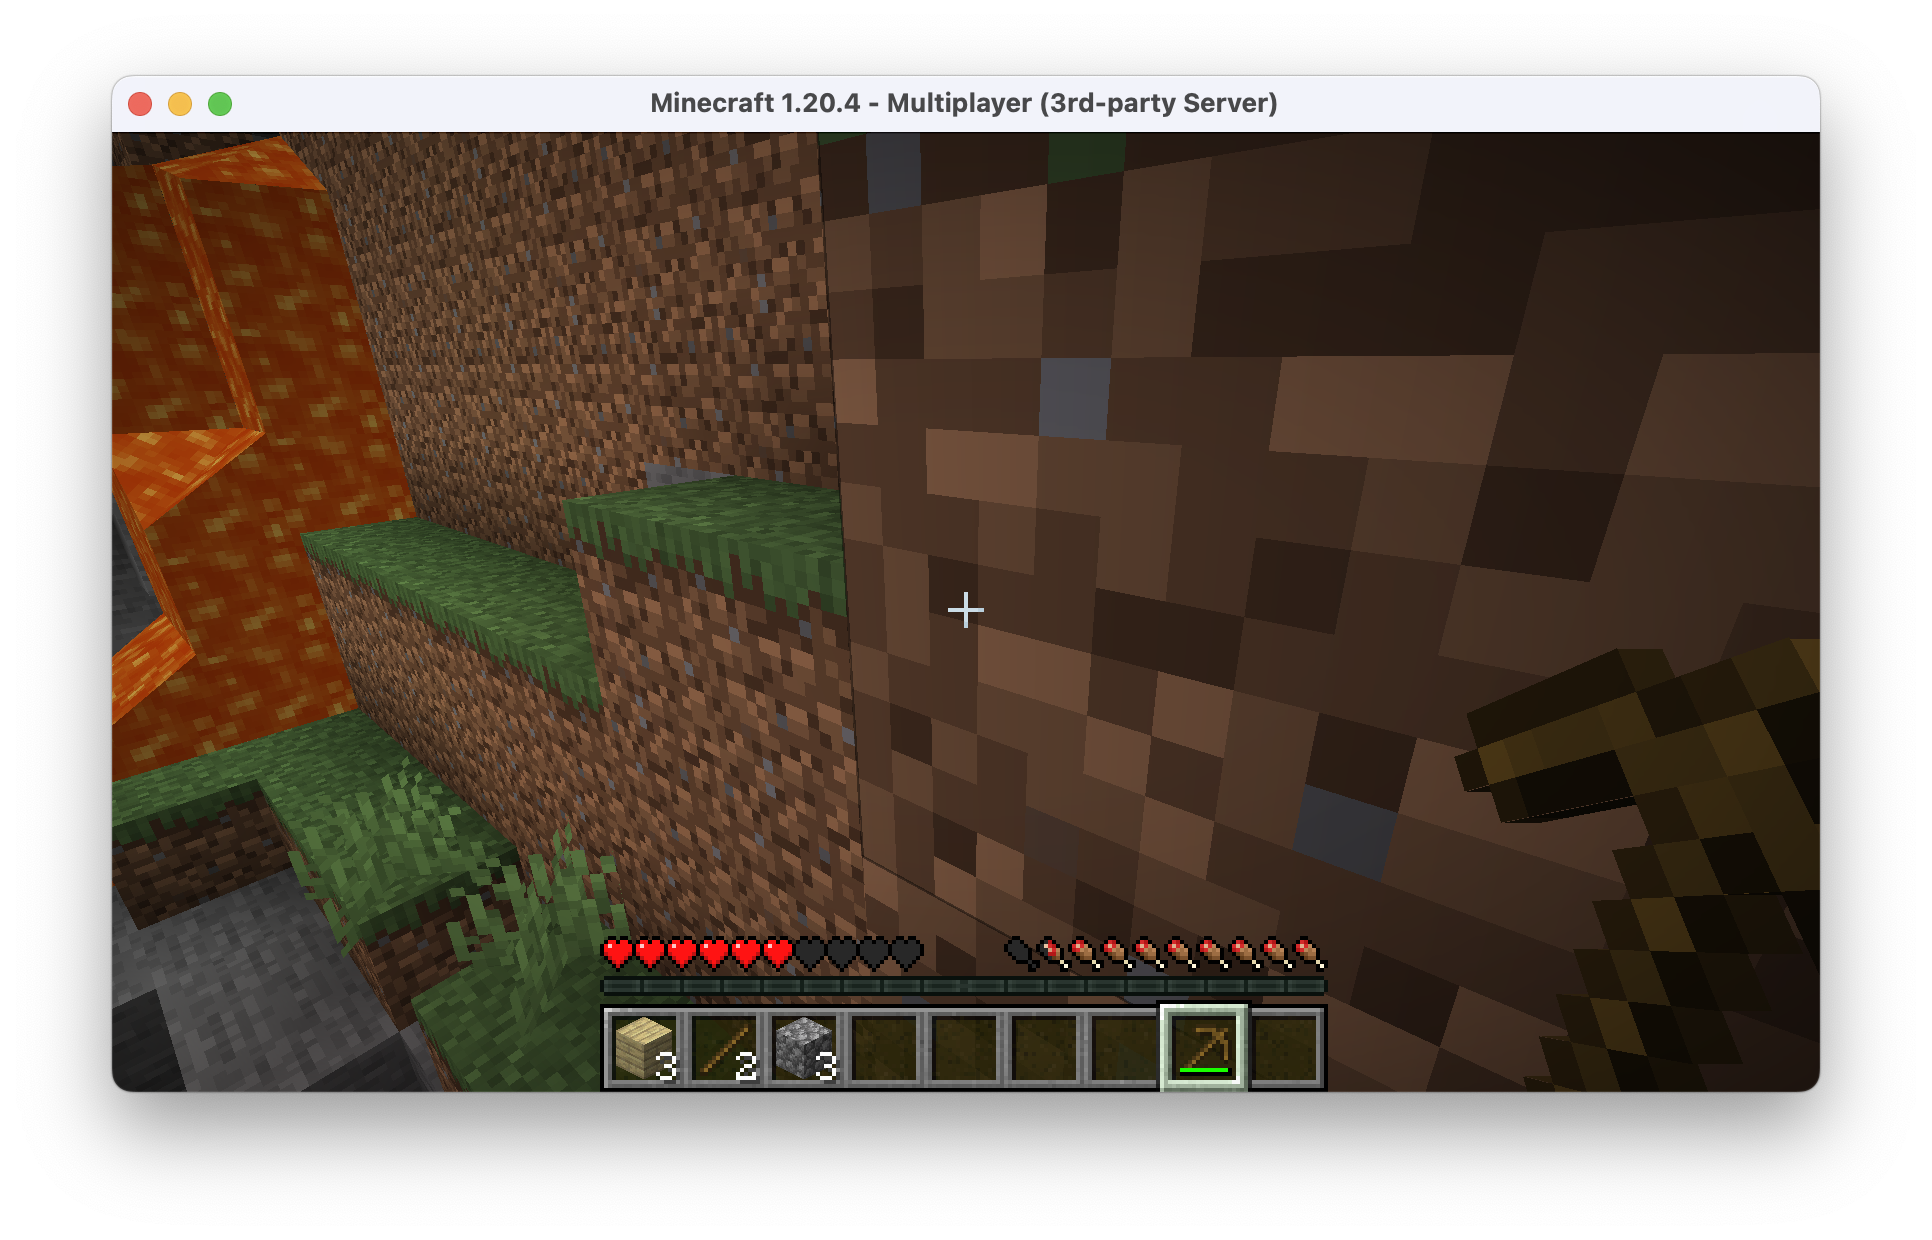 A Minecraft window connected to the server. The player is looking at a wall of dirt
while holding a wooden pickaxe